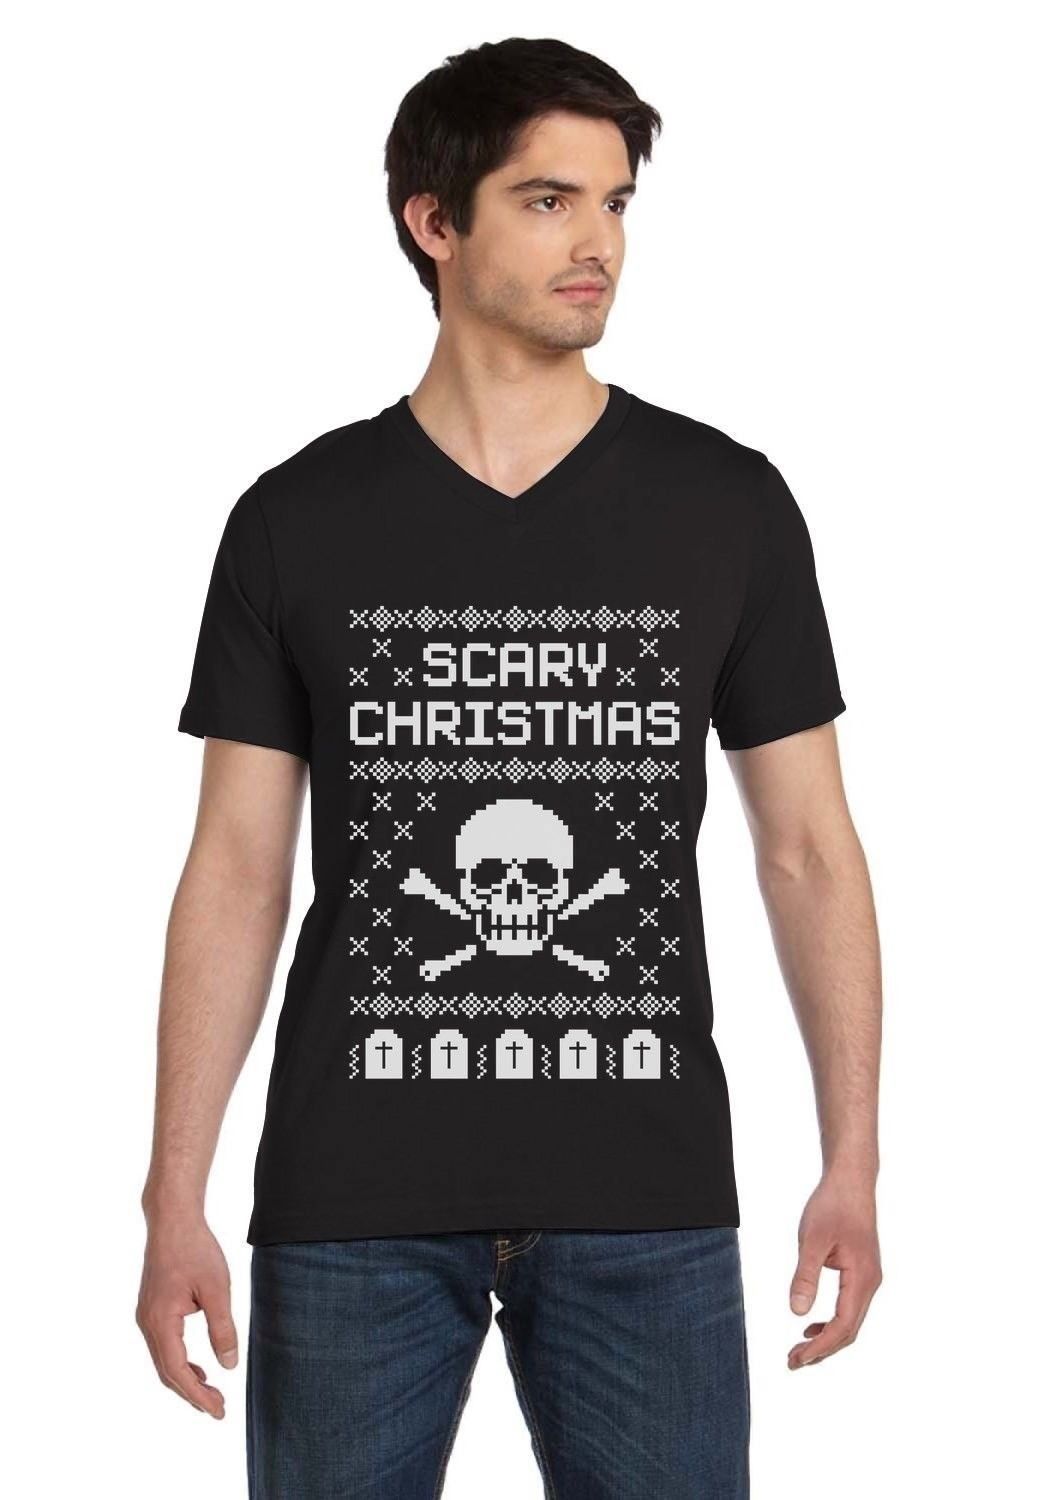 Ugly Christmas Sweater Skull Scary Christmas Cool V Neck T Shirt Gift Idea 10 T Shirt Awesome T Shirts line From Alltrends $11 56 Dhgate